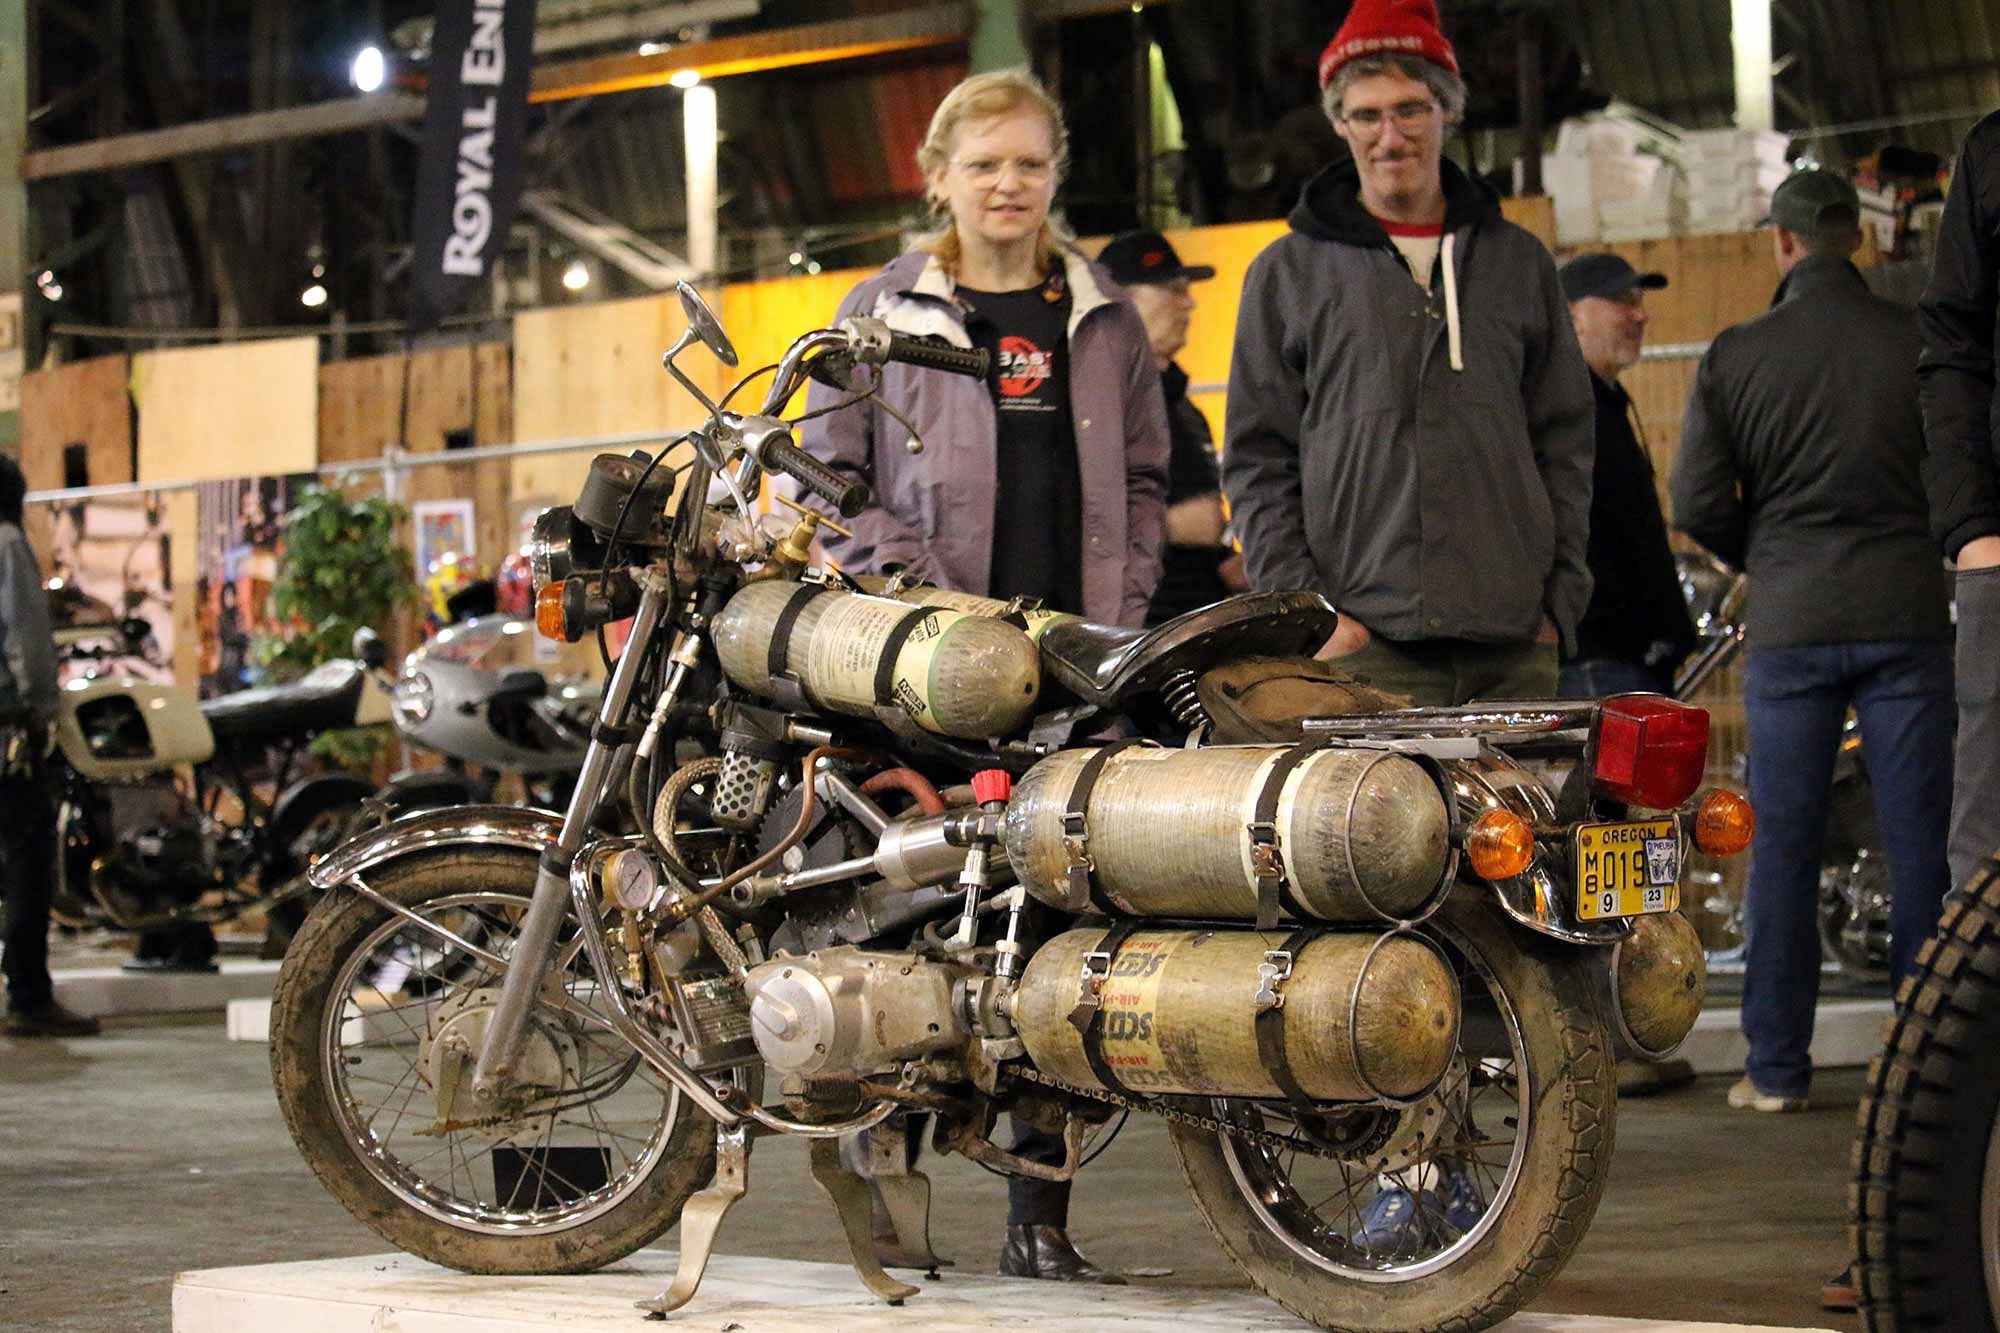 Ever seen a motorcycle that runs on compressed air? You would have if you were in Portland at the One Show last weekend.